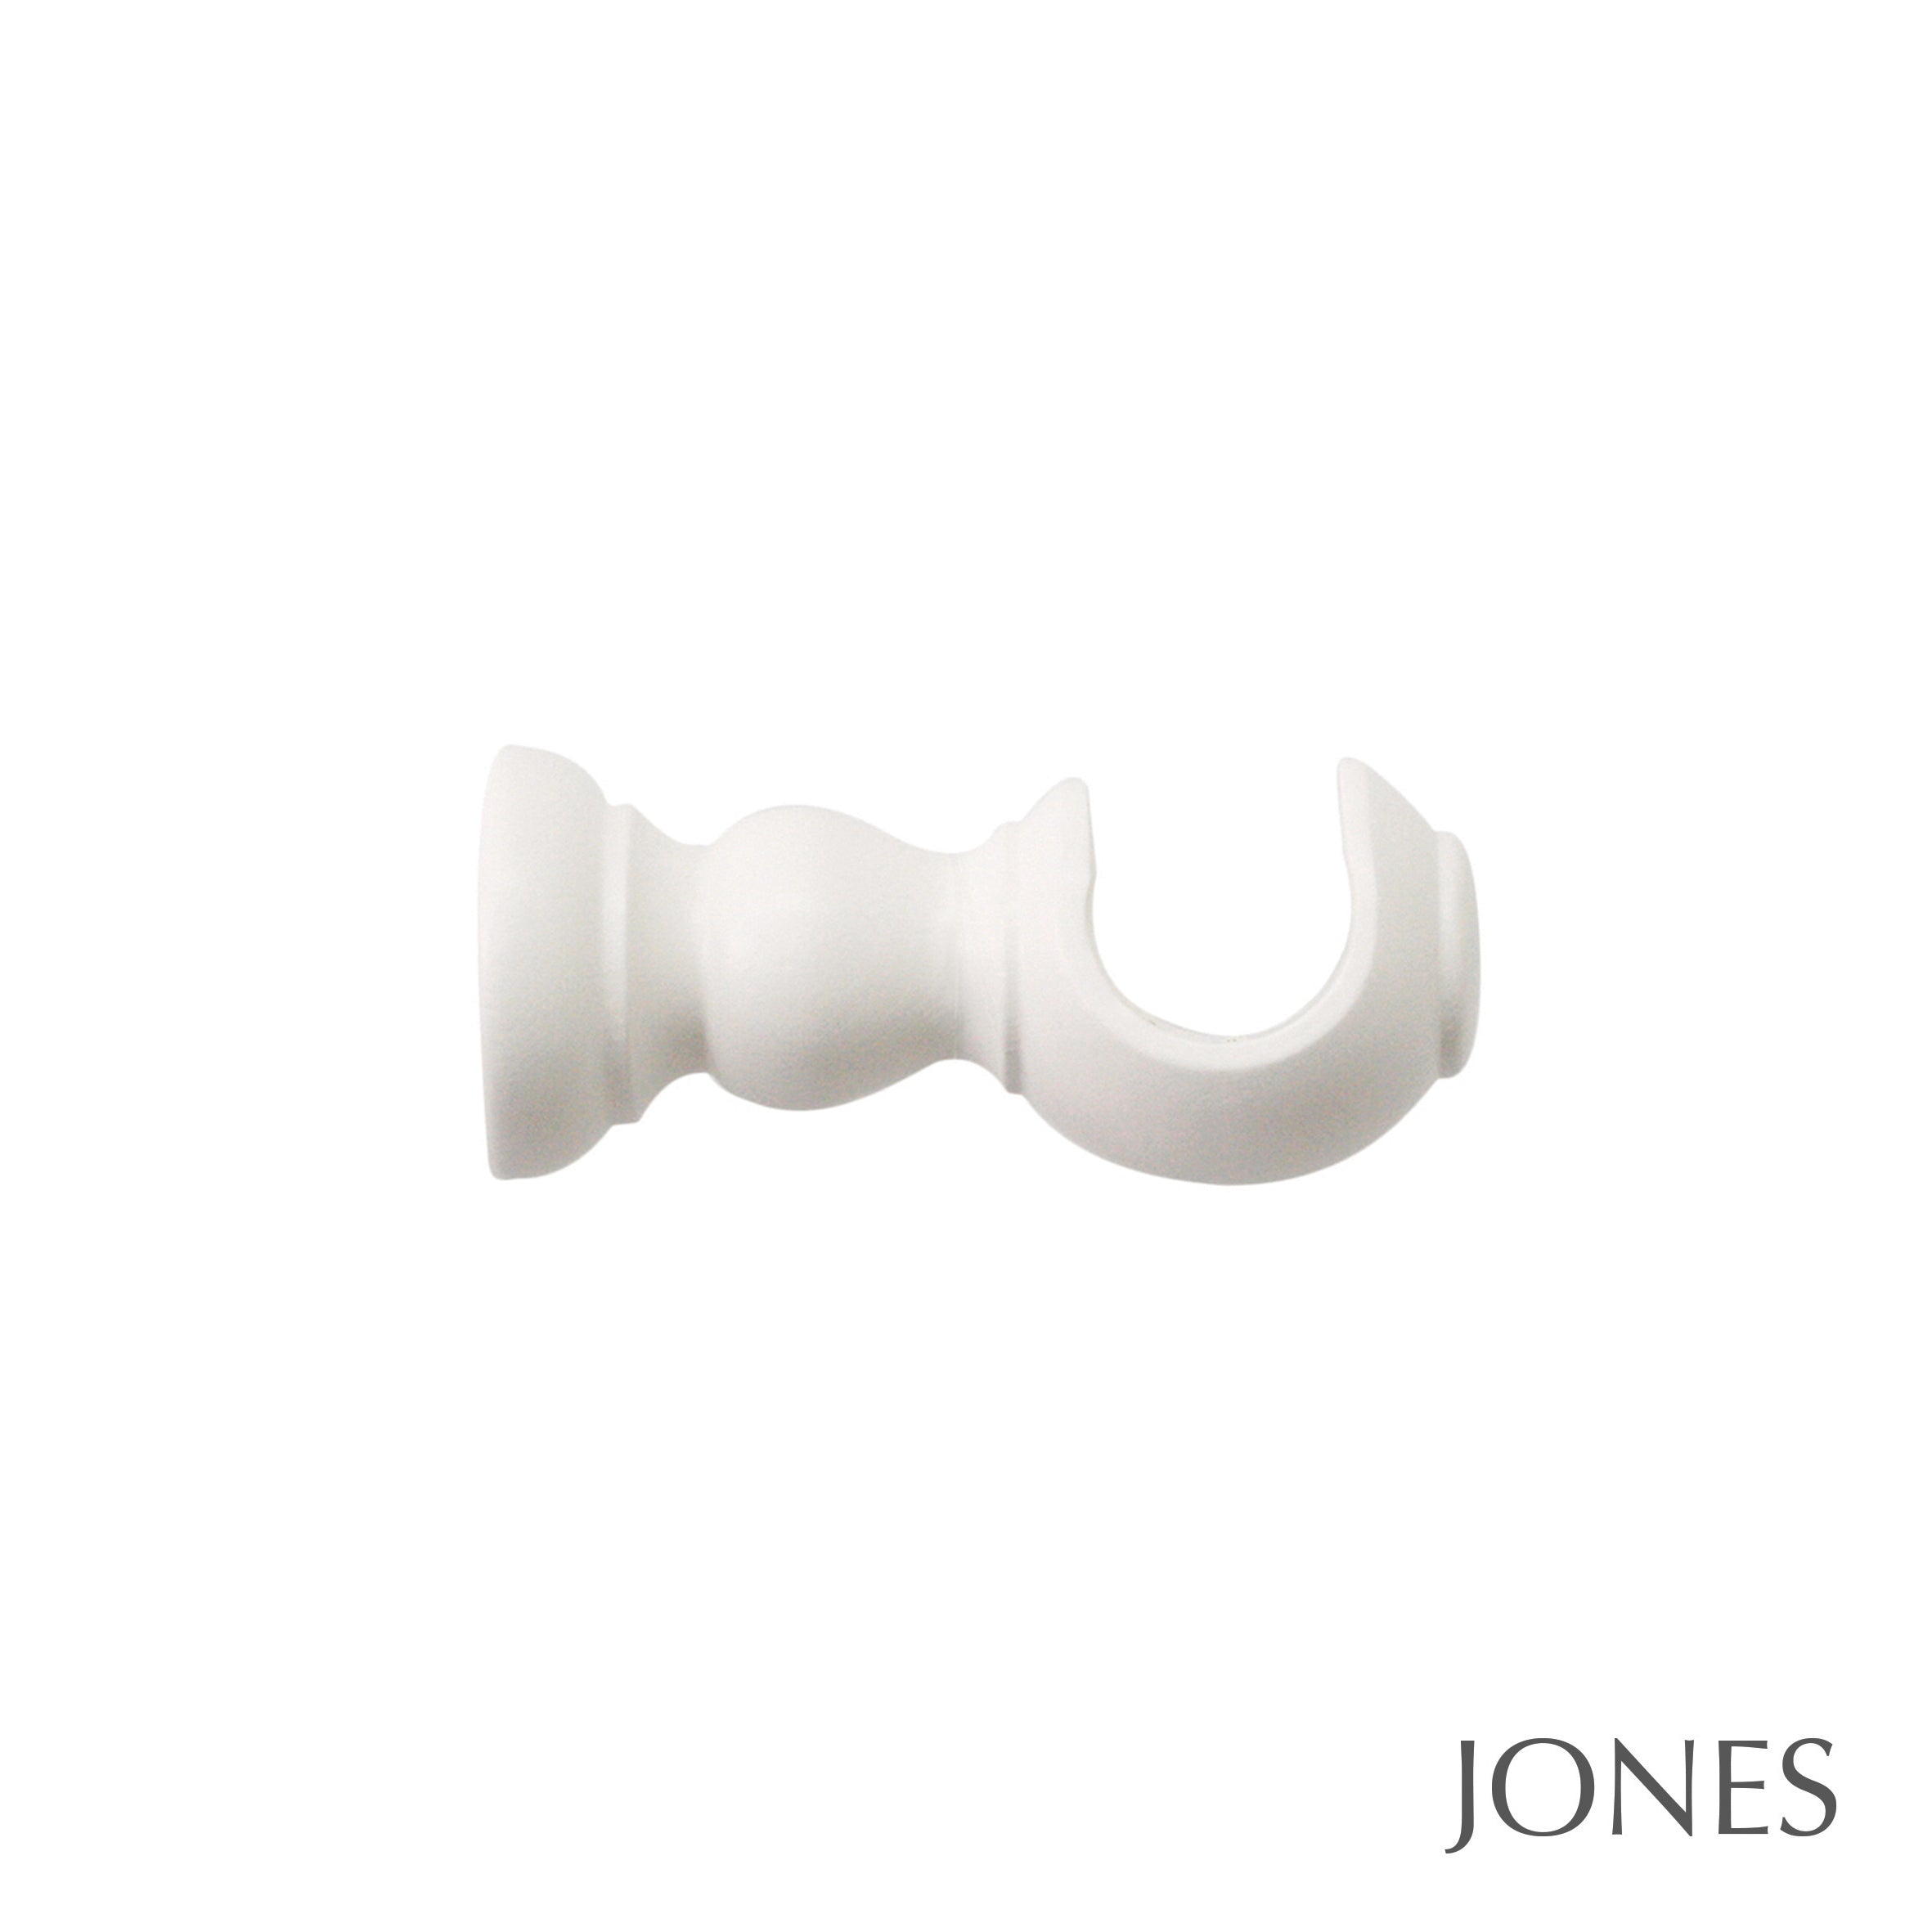 Jones Interiors Cathedral Ball Finial Curtain Pole Set in Cotton